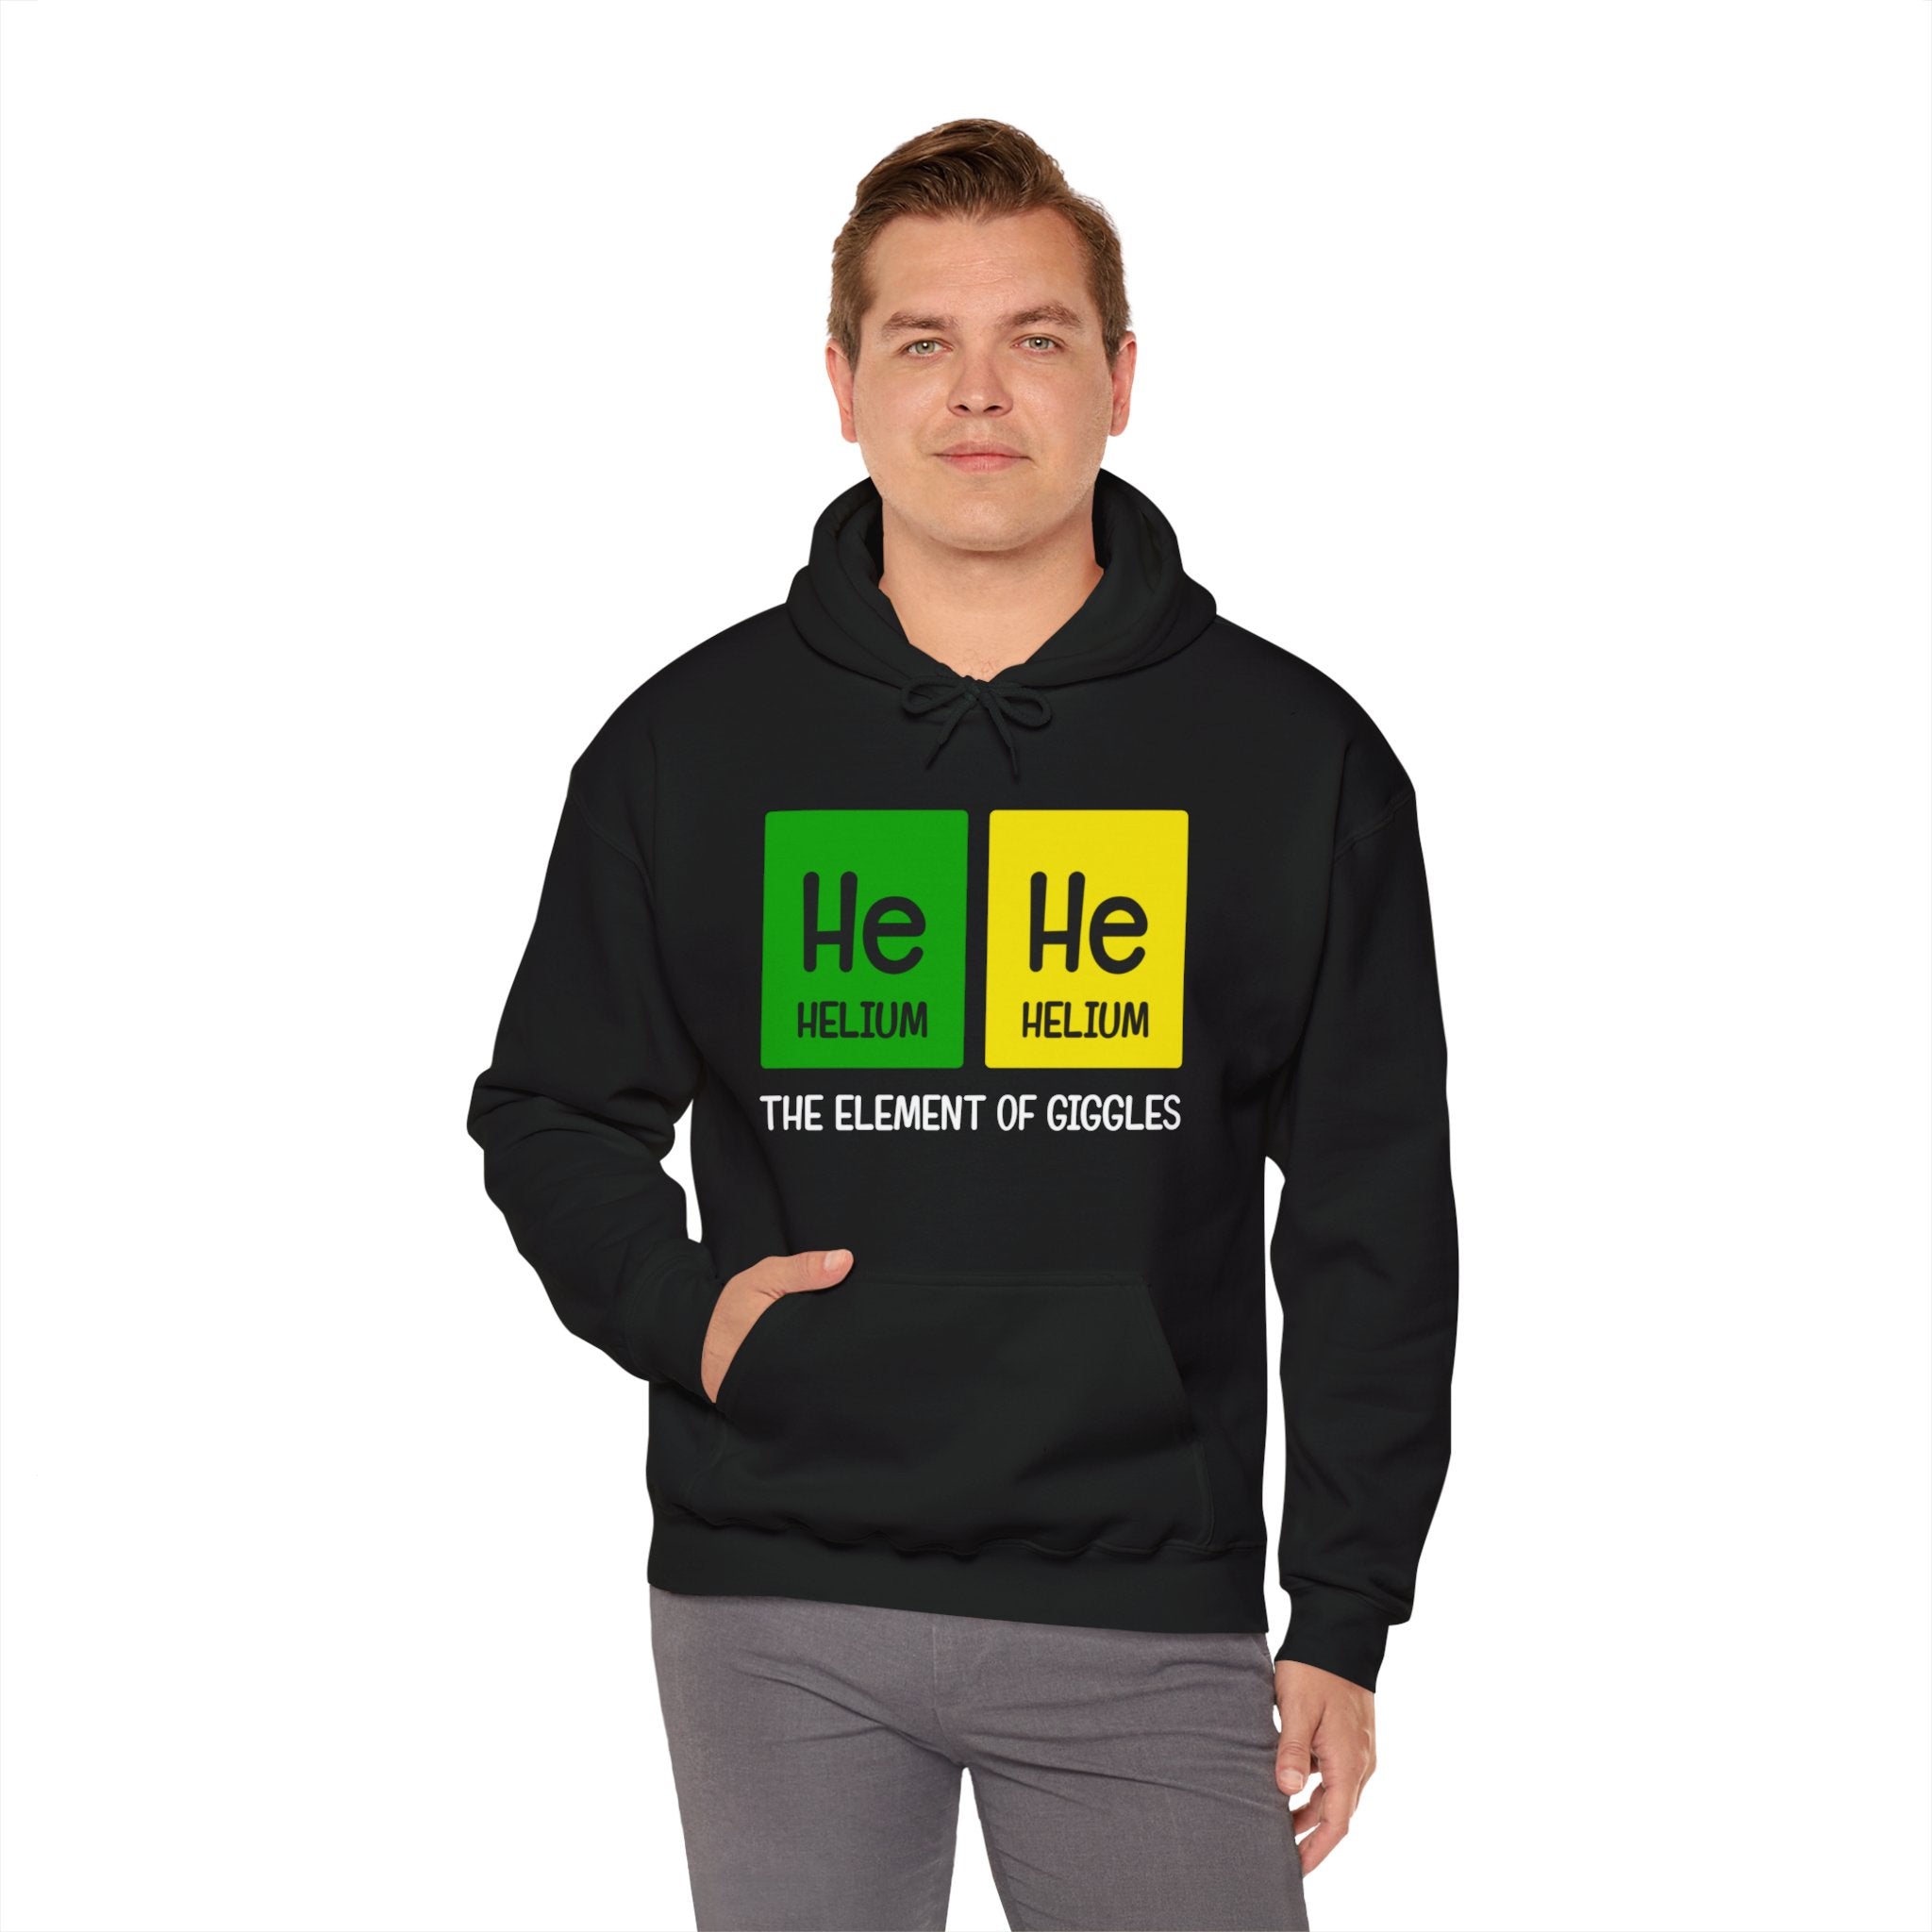 A person wearing a He-He - Hooded Sweatshirt with a periodic table design featuring Helium (He), whimsically labeled as "The Element of Giggles" by He-He designs.